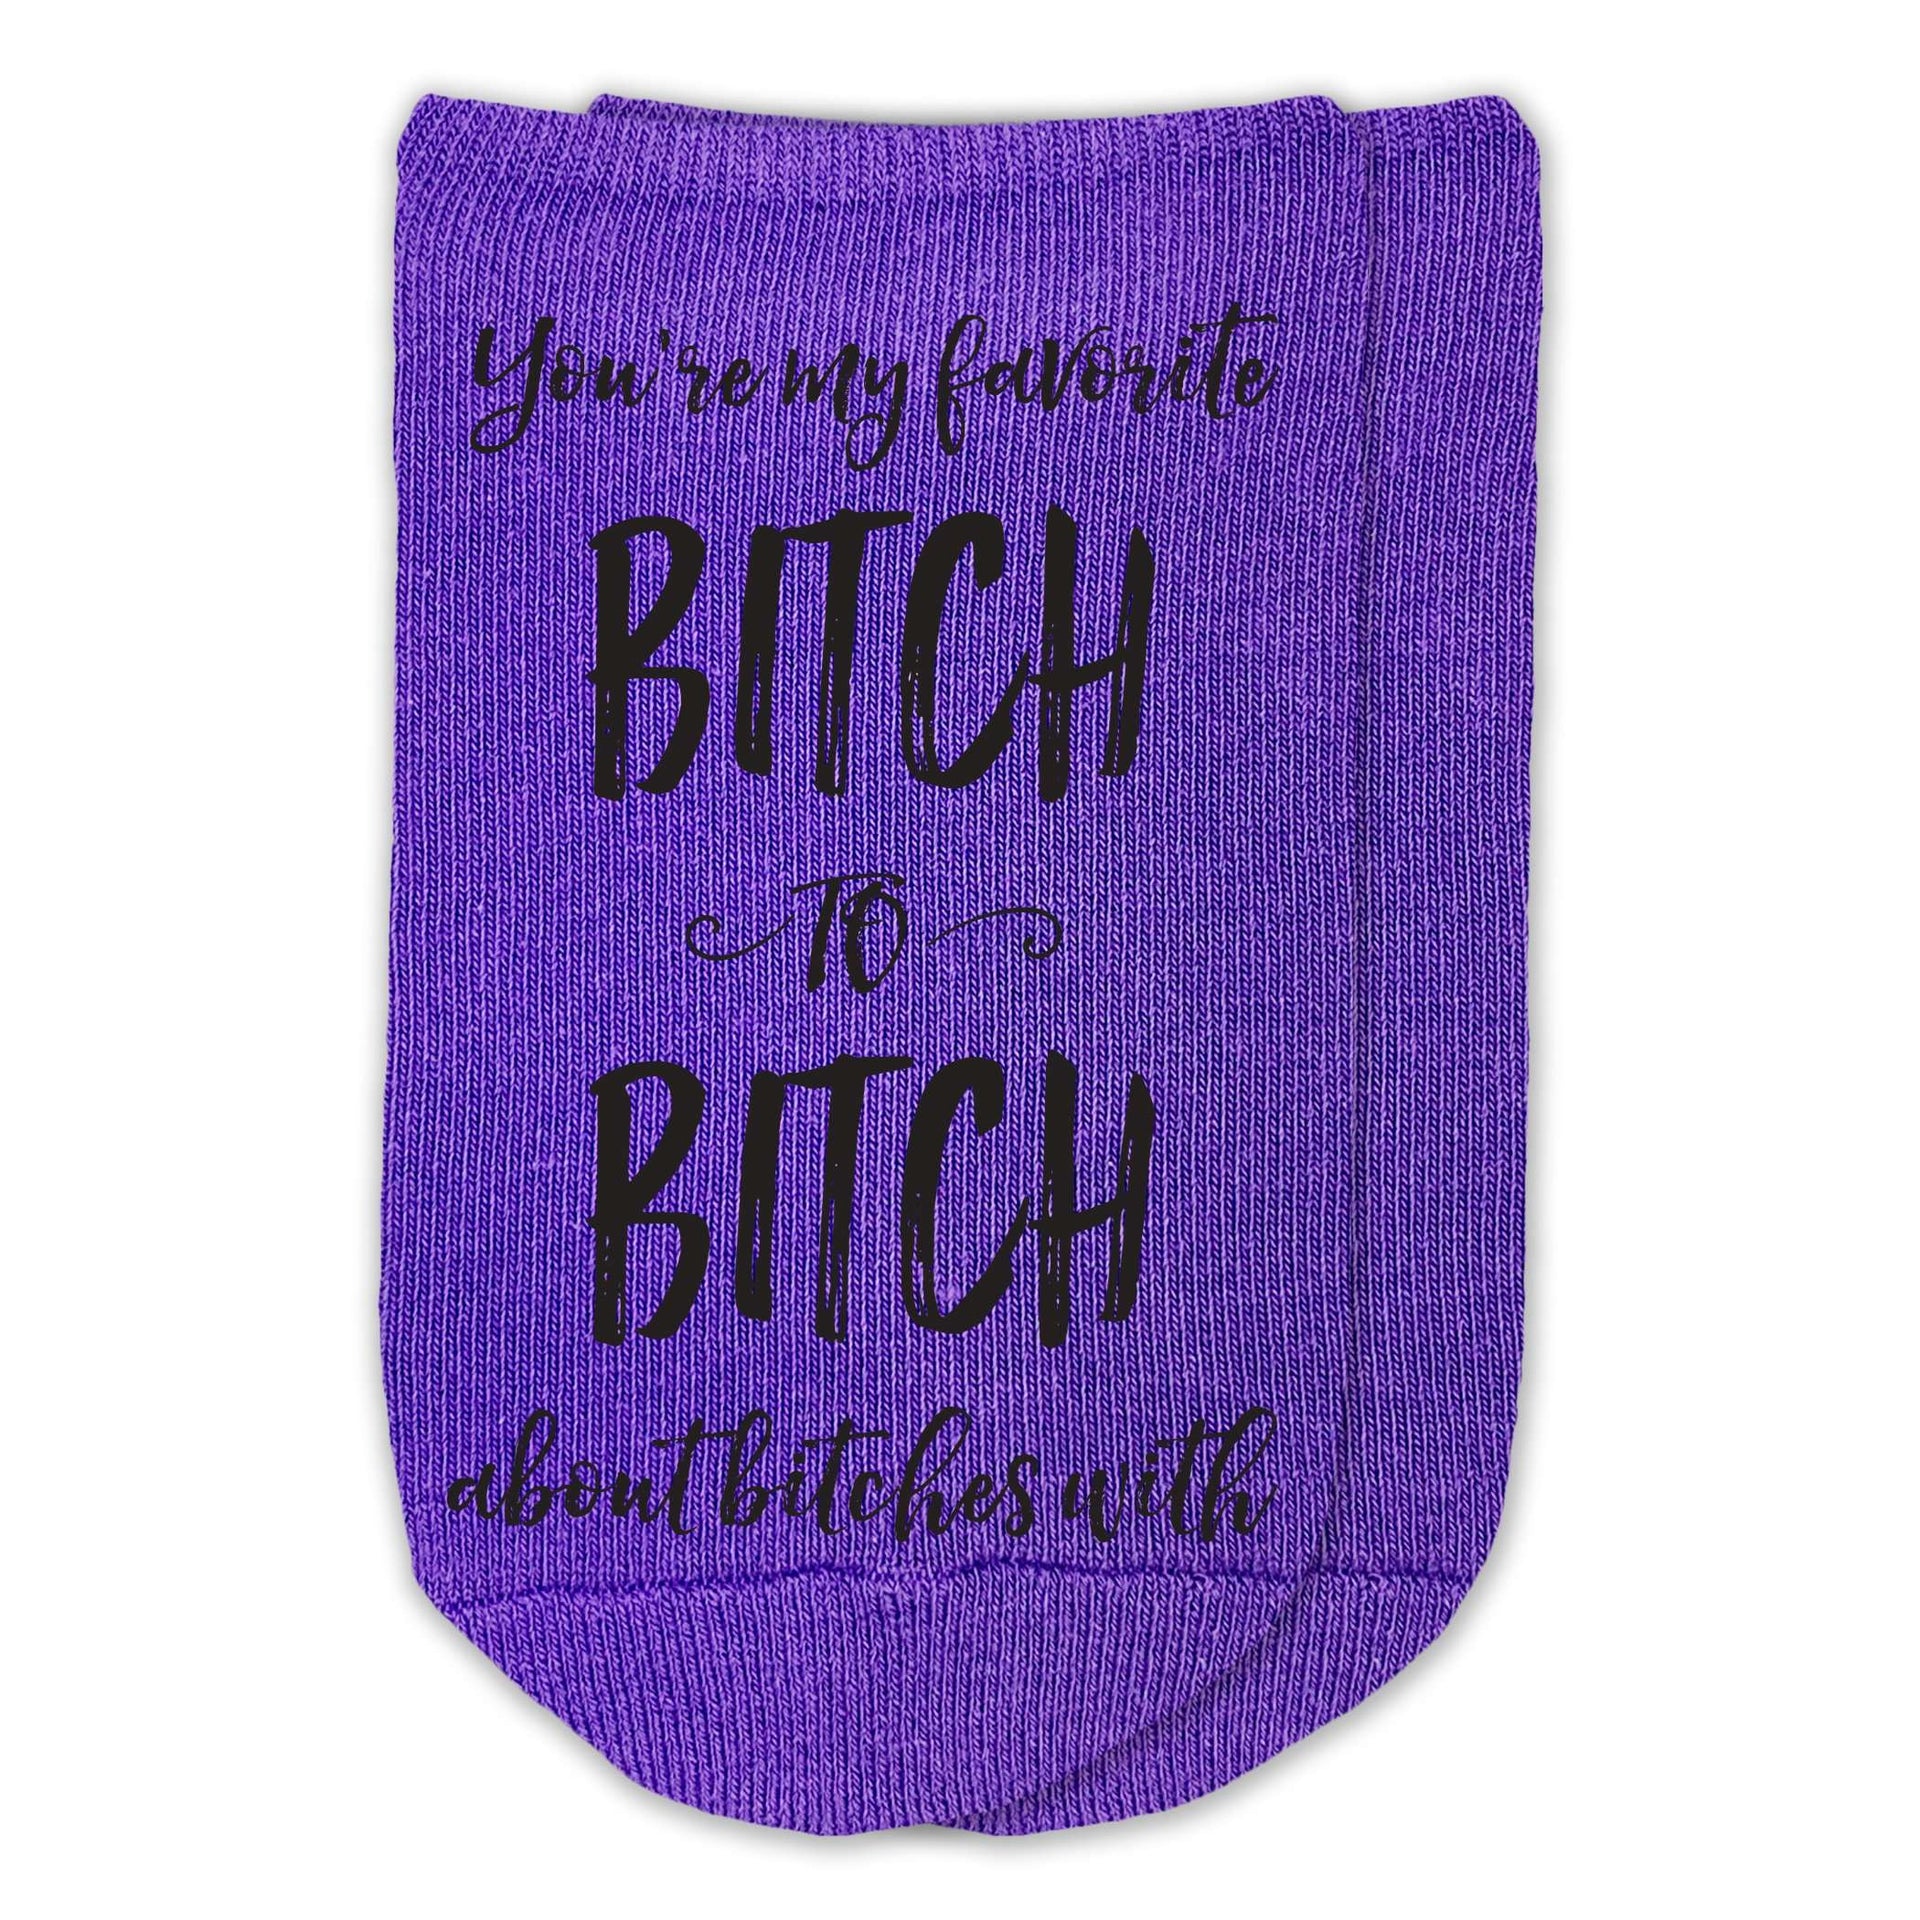 You're my favorite bitch to bitch about bitches with custom printed on purple cotton no show socks.